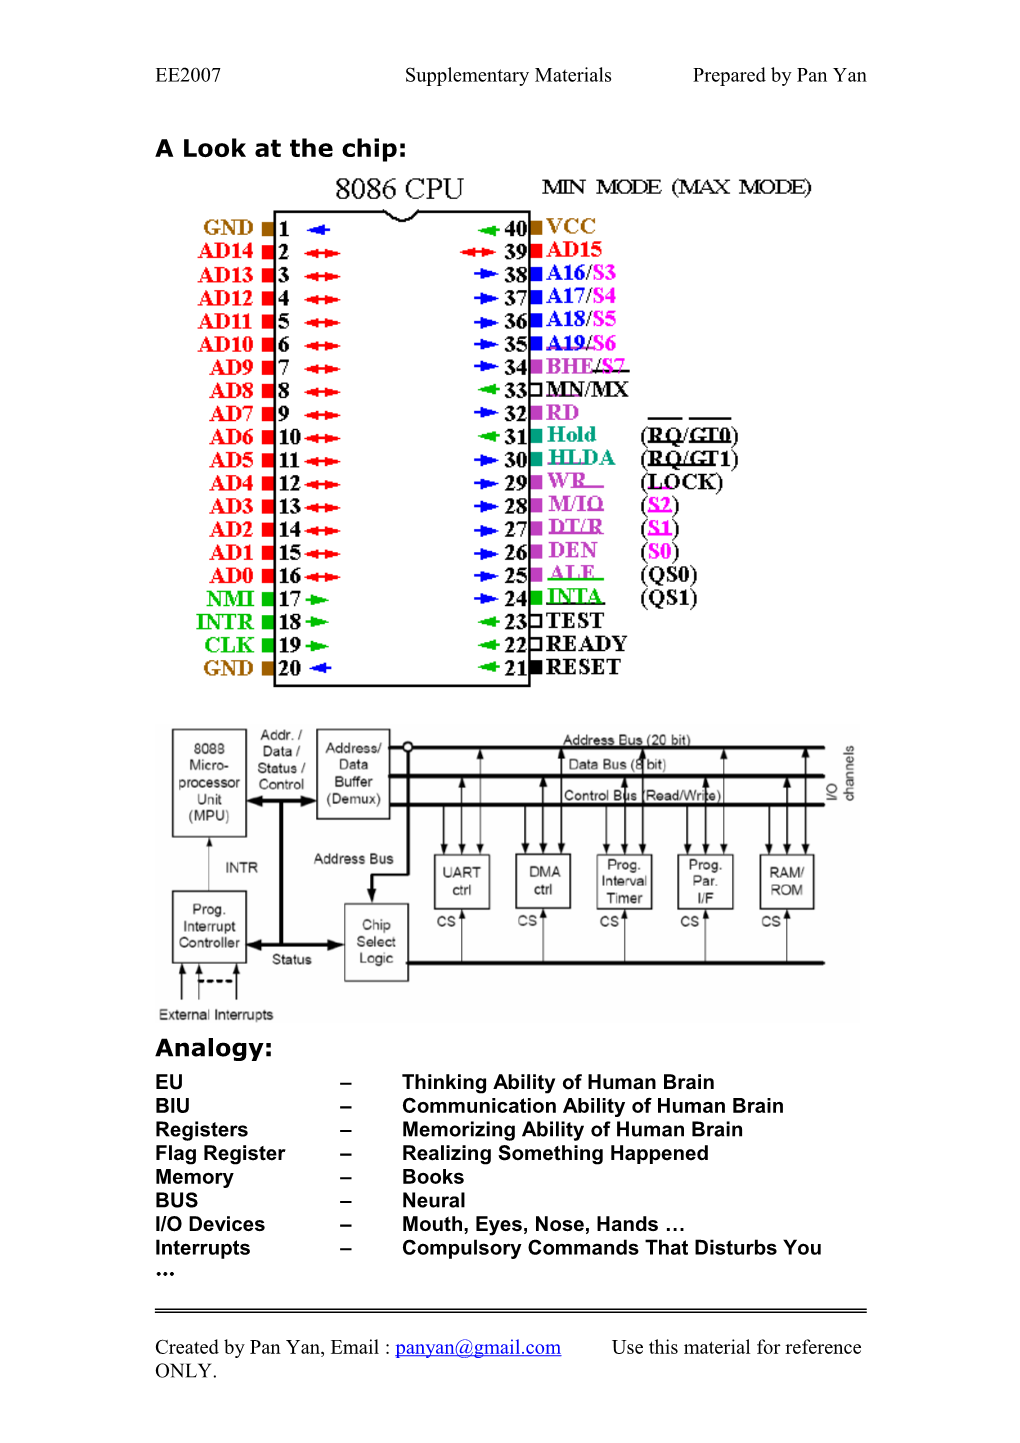 Overview of the Chip. Registers